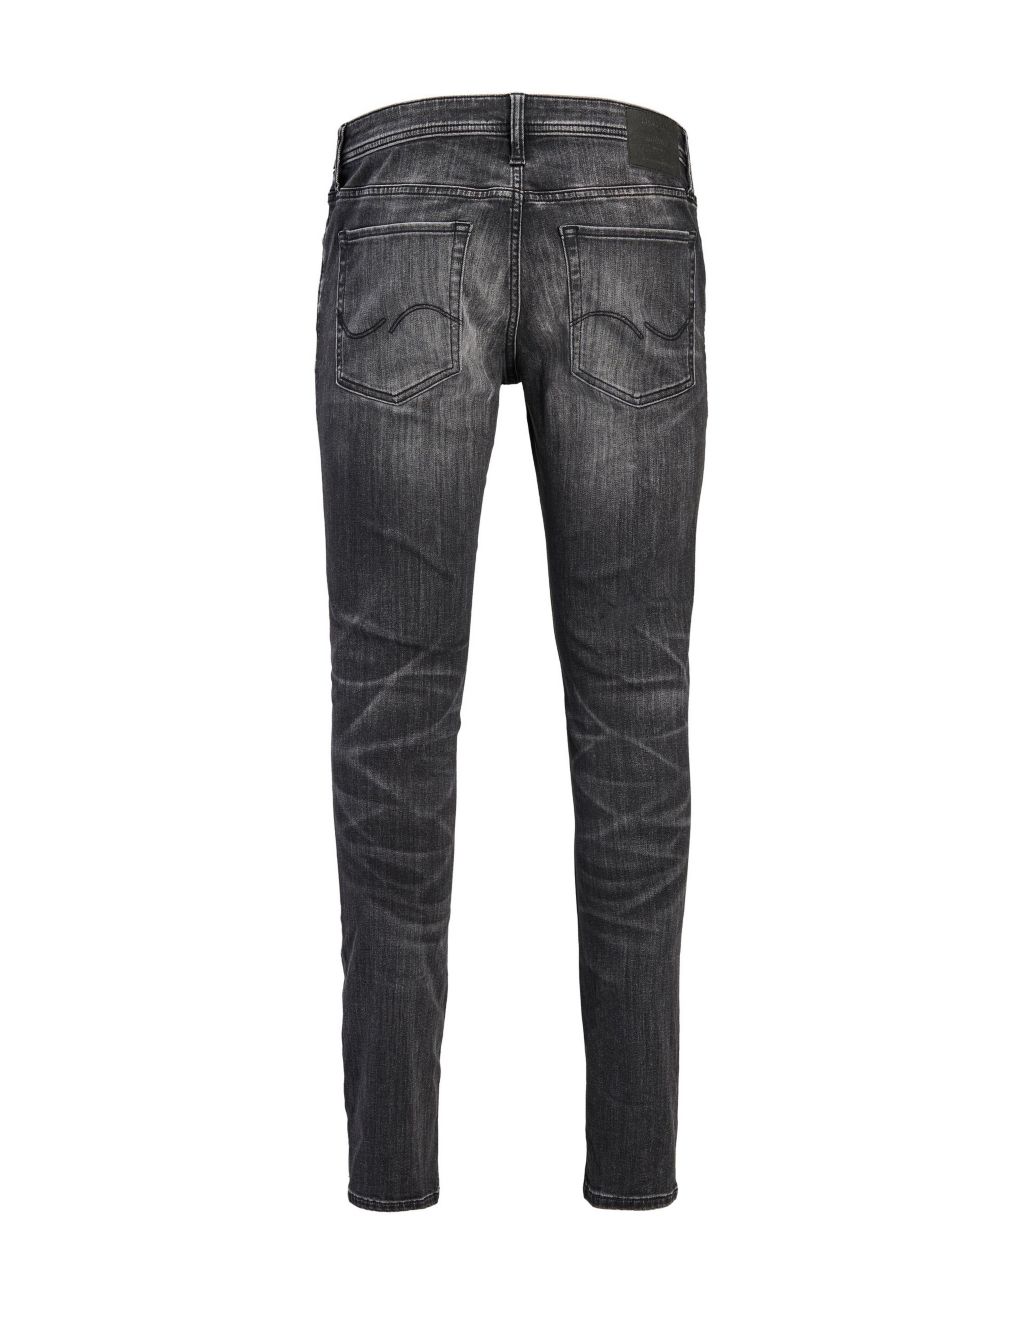 Cotton Rich Slim Fit Jeans (8 Yrs - 16 Yrs) image 5